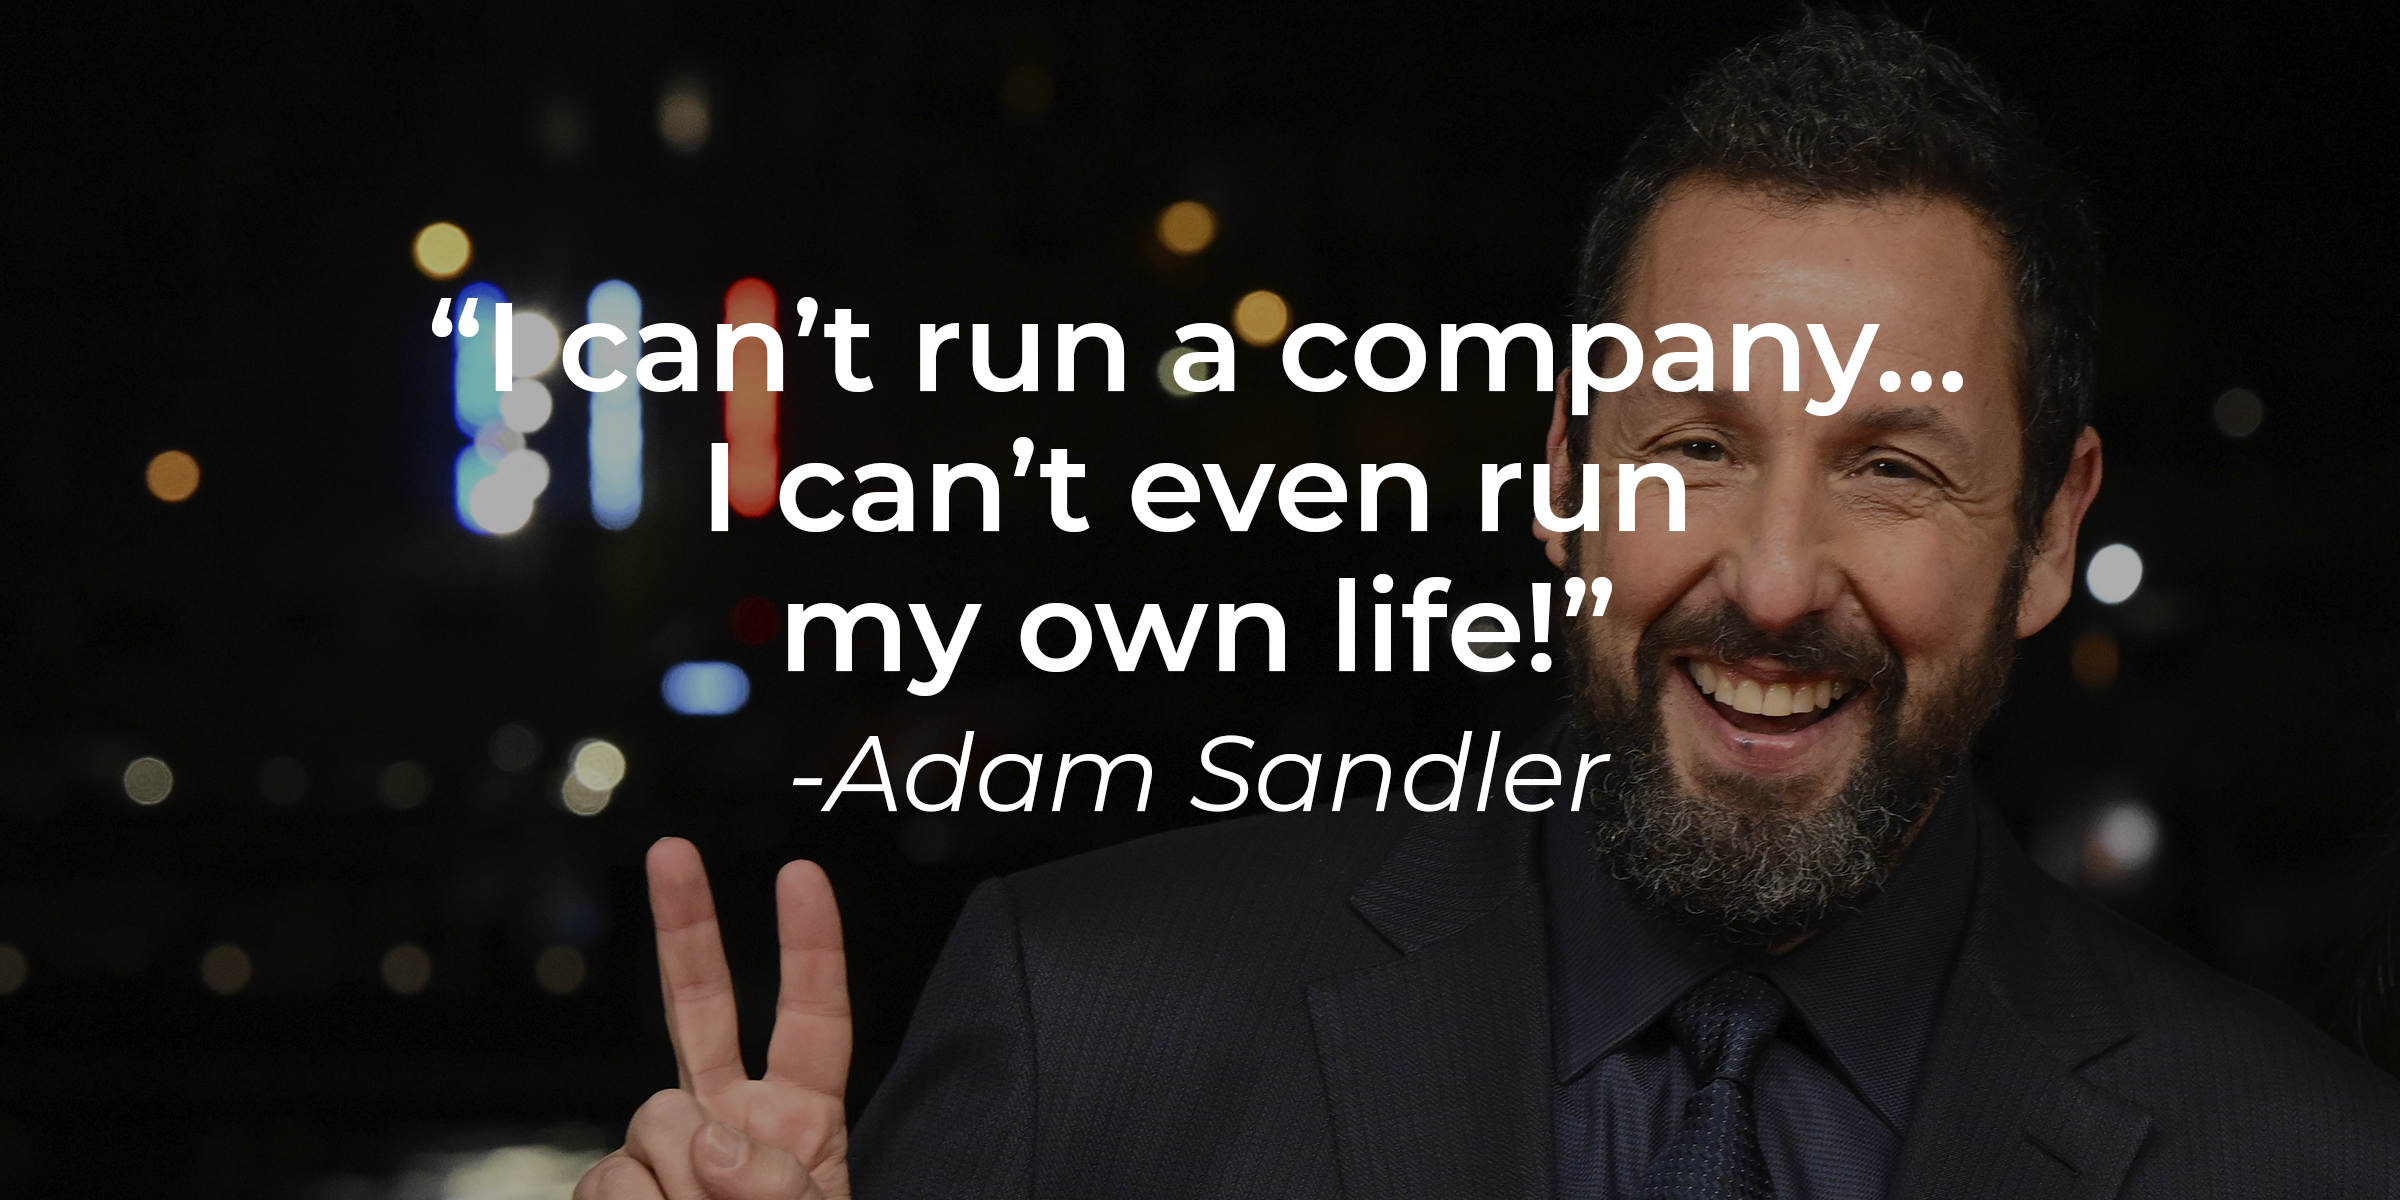 Adam Sandler's quote: “I can’t run a company… I can’t even run my own life!” | Source: Getty Images